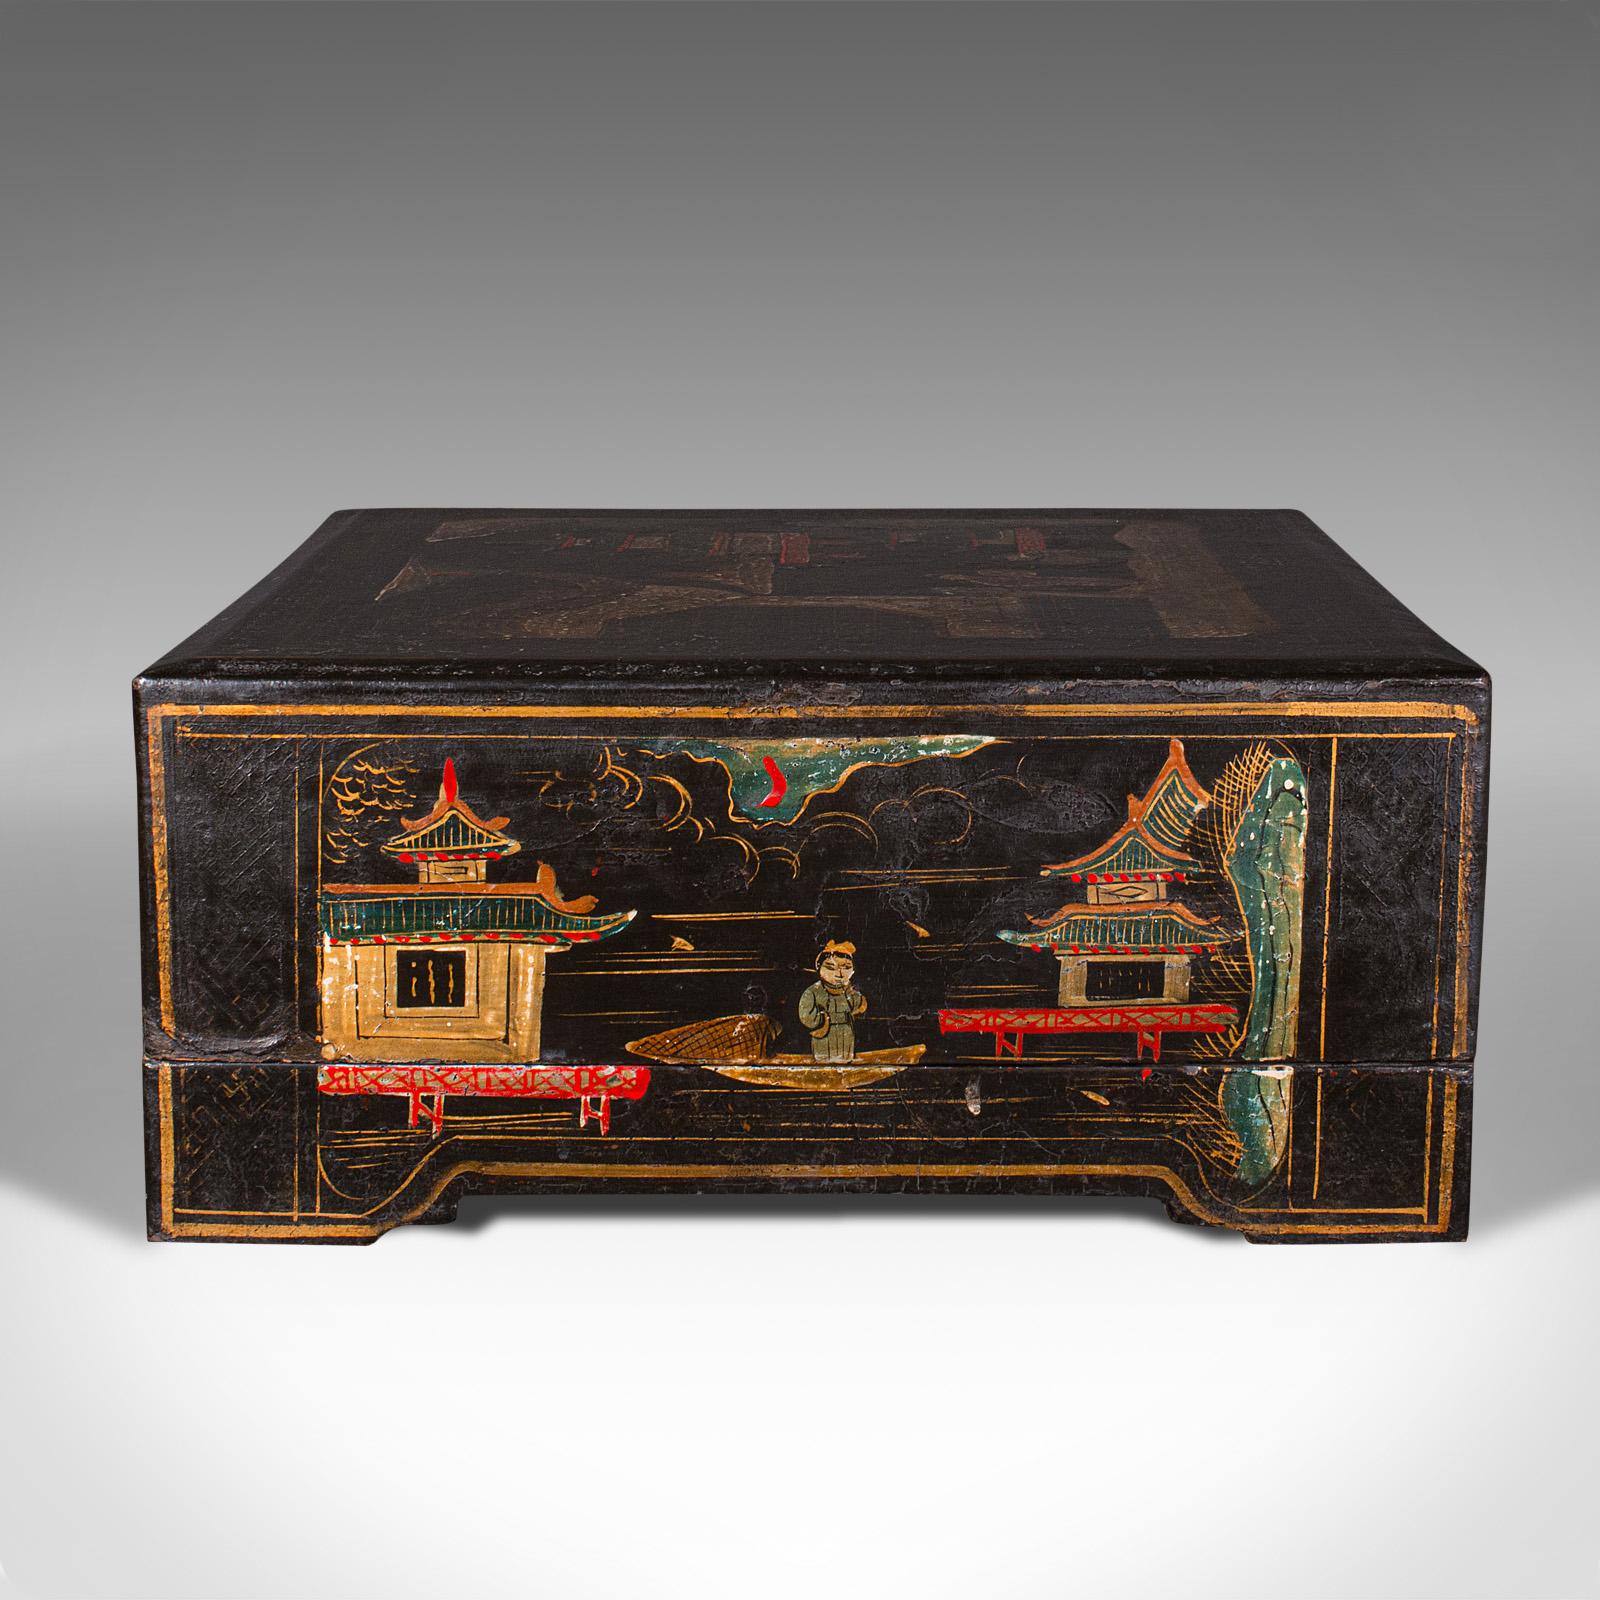 Antique Ceremonial Presentation Box, Japanese, Lacquered, Decor, Victorian, 1860 In Good Condition For Sale In Hele, Devon, GB